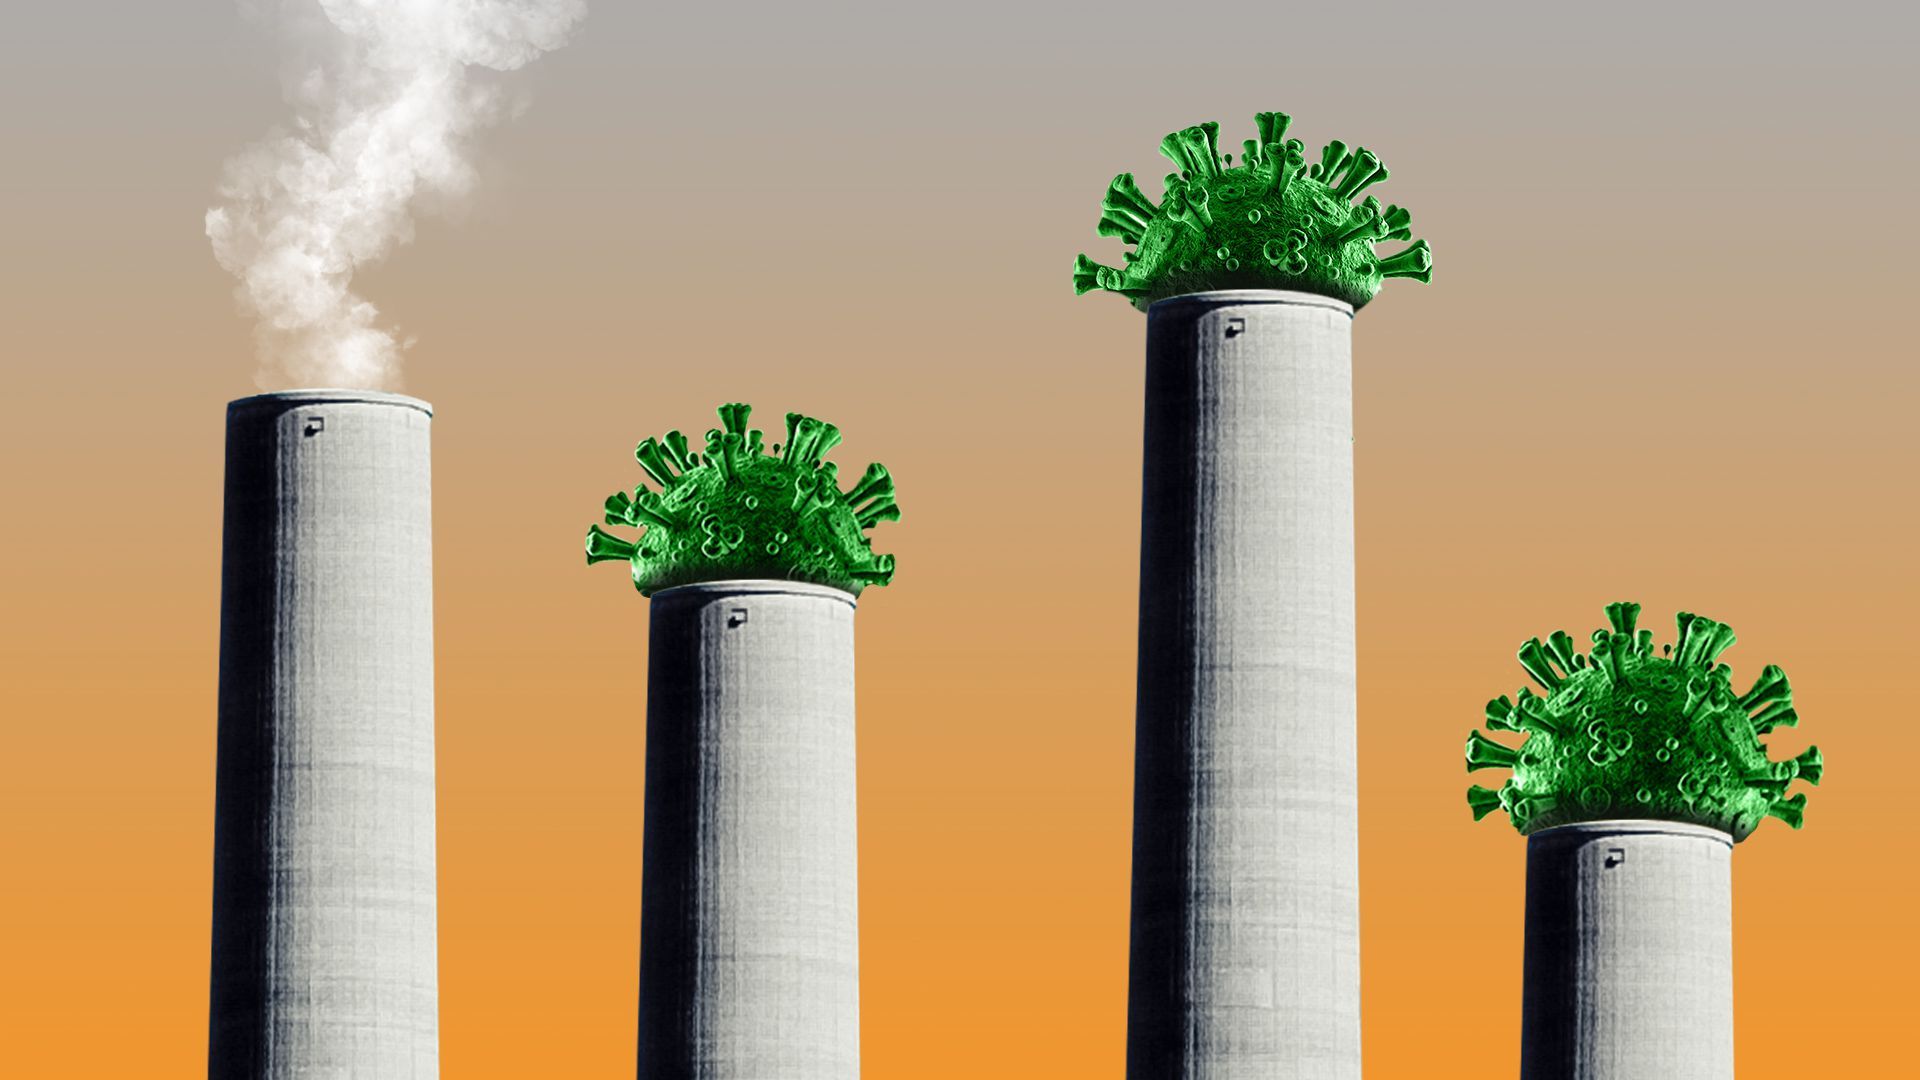 Illustration of several smoke stacks, with all but one stuffed with a COVID cell.